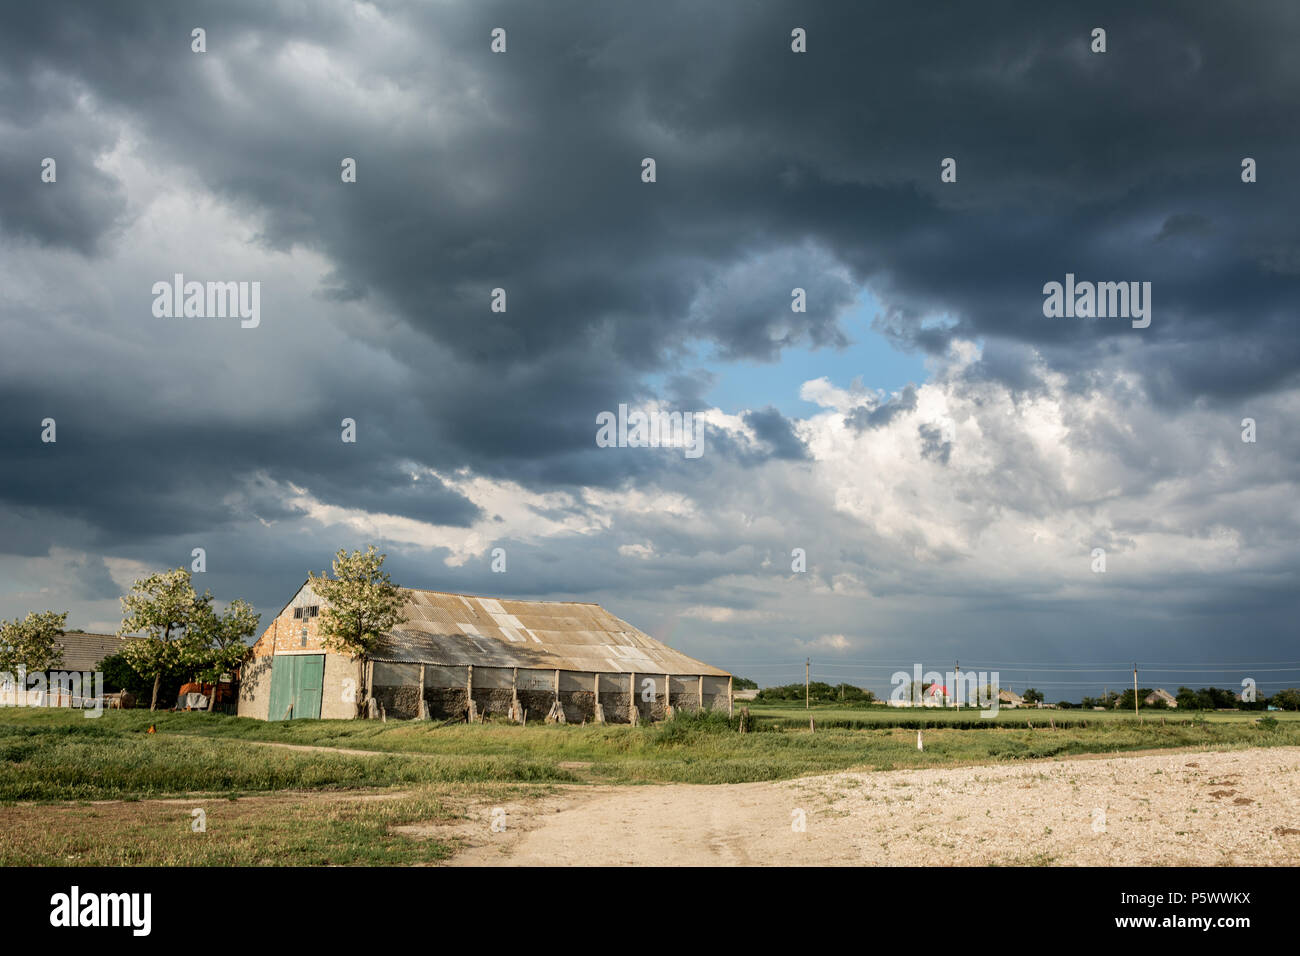 A cowshed in the background of a thunderous landscape. Gloomy thunderous rural landscape. Stock Photo